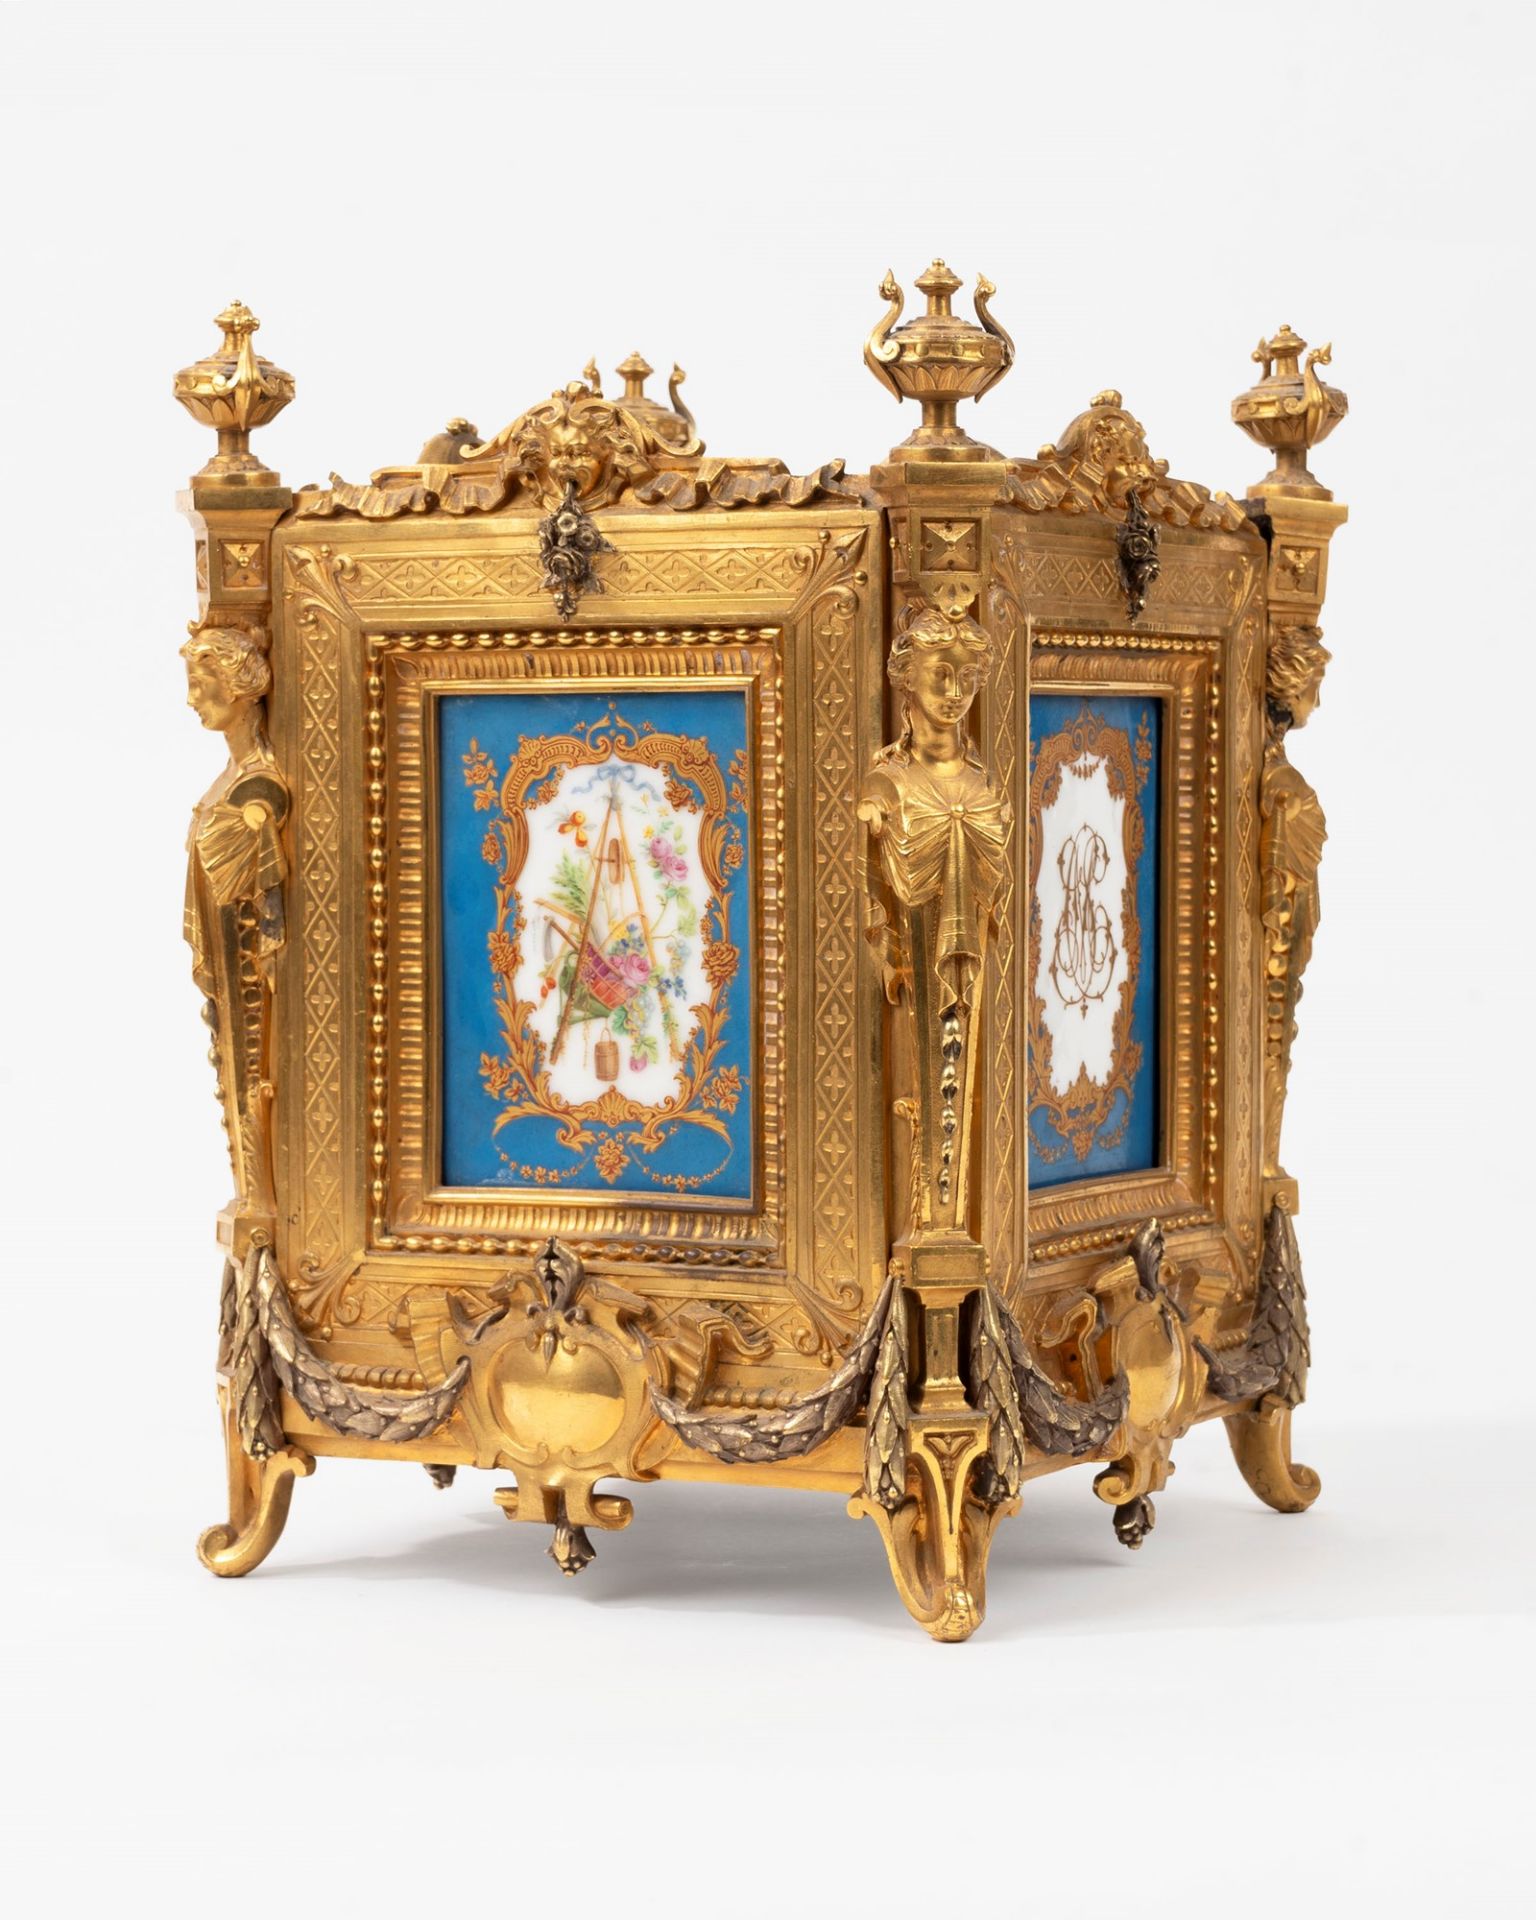 Important Napoleon III jardinier in gilded bronze and porcelain, France, 19th century - Image 4 of 7